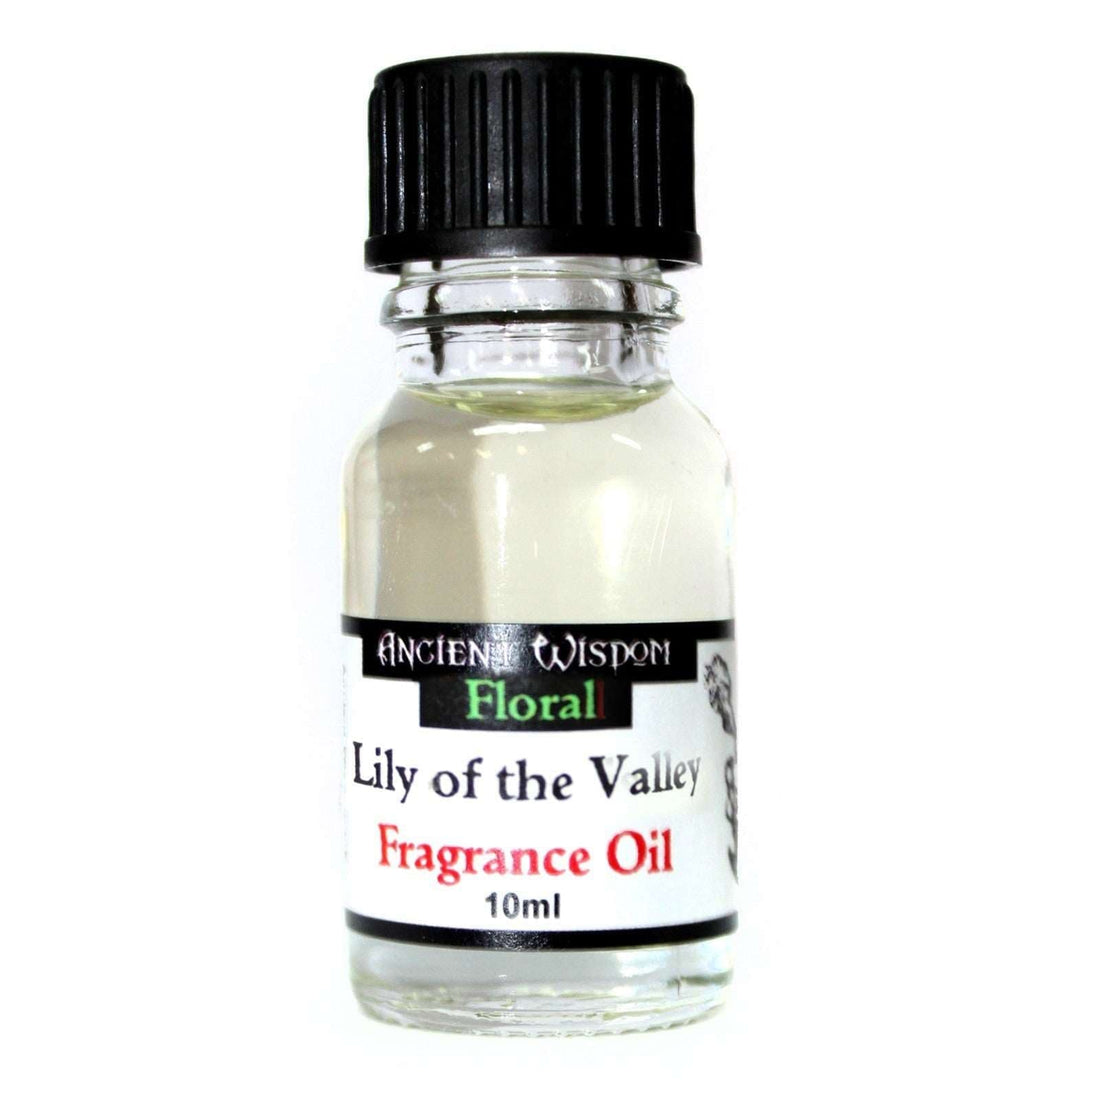 10ml Lily Of The Valley Fragrance Oil - best price from Maltashopper.com AWFO-37